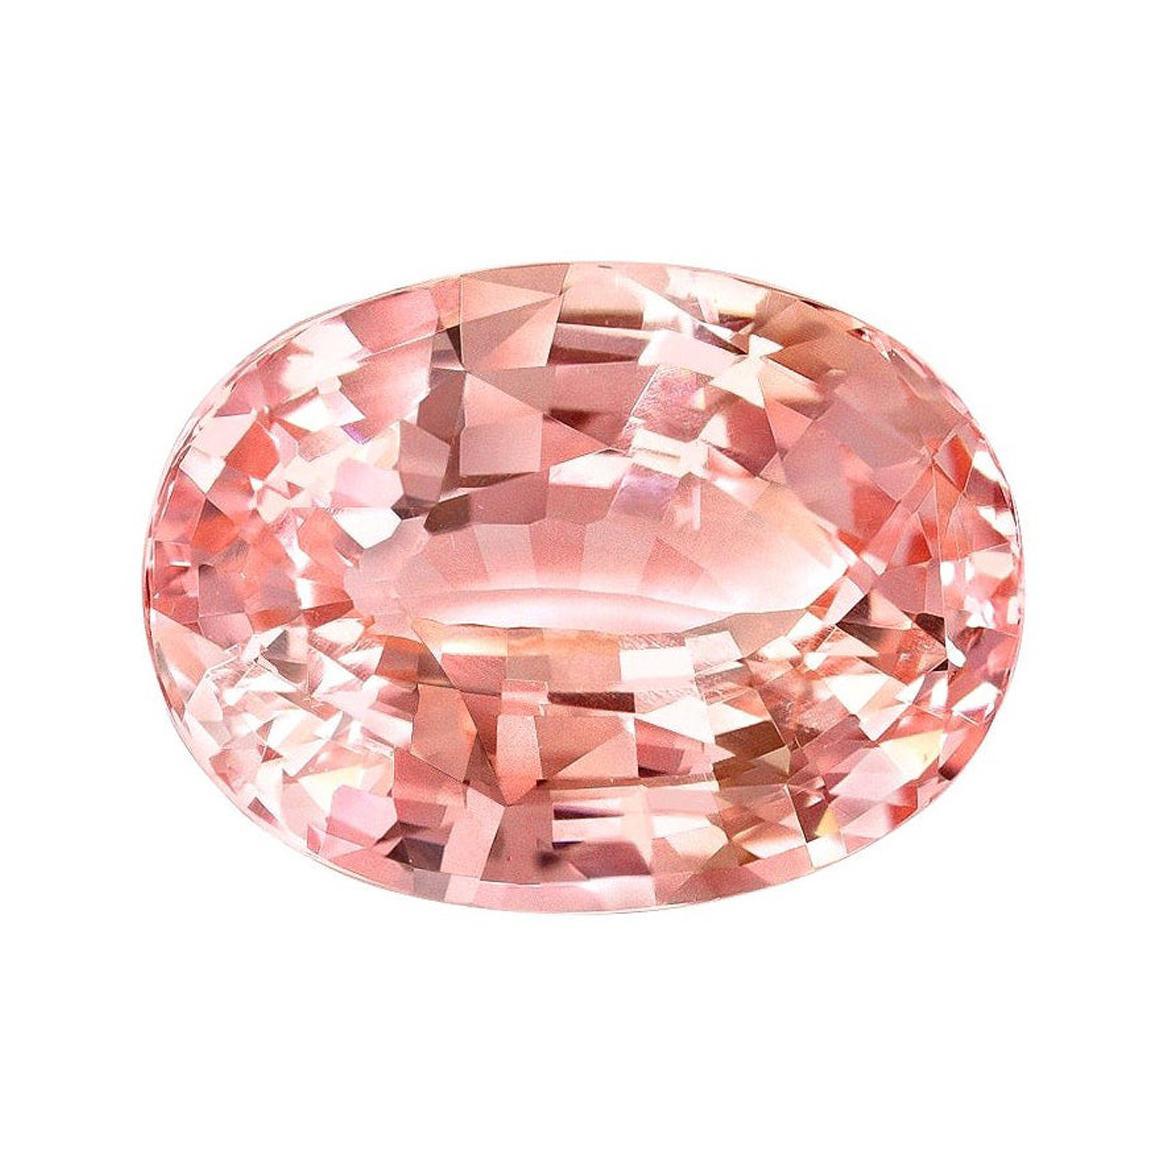 Details about   AAA 8.45 Ct Natural Rare Ceylon Padparadscha Sapphire Loose Gemstone Certified 